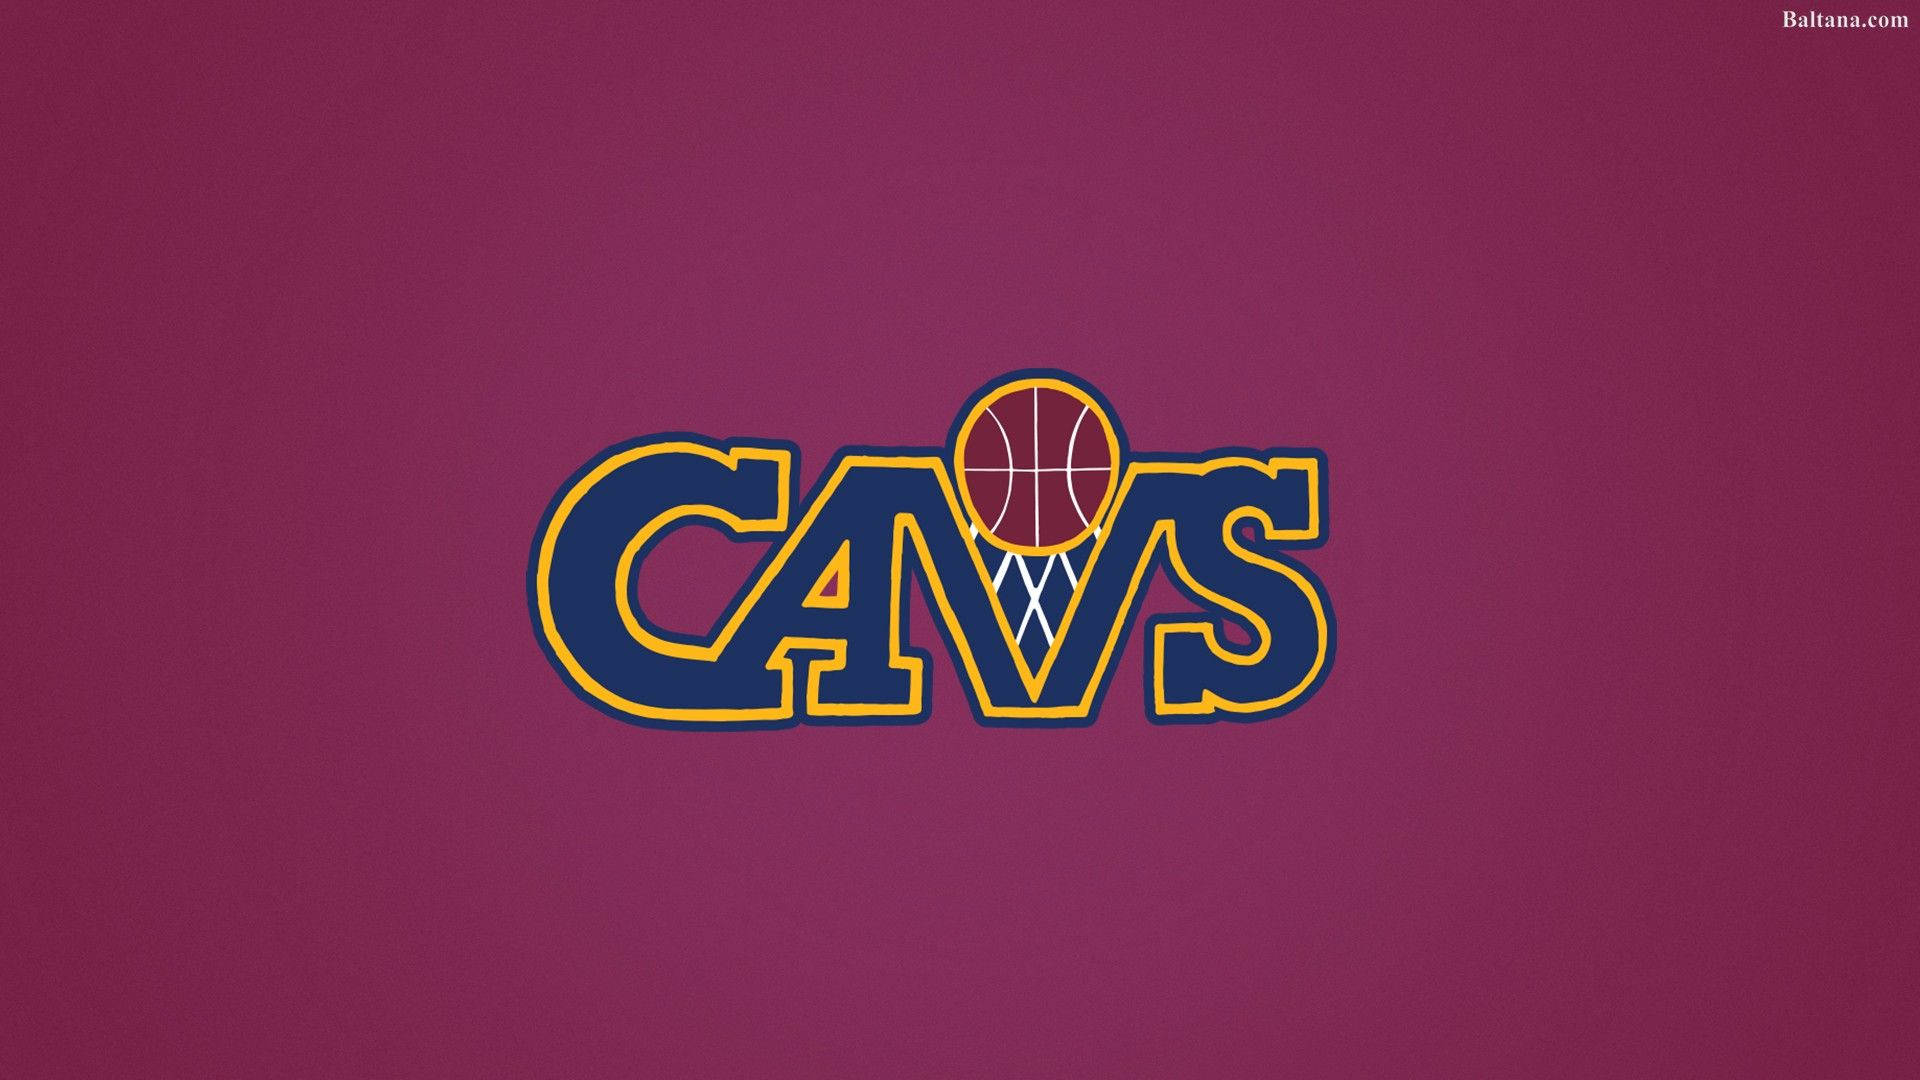 Cleveland Cavaliers Ring-logo. Wallpaper